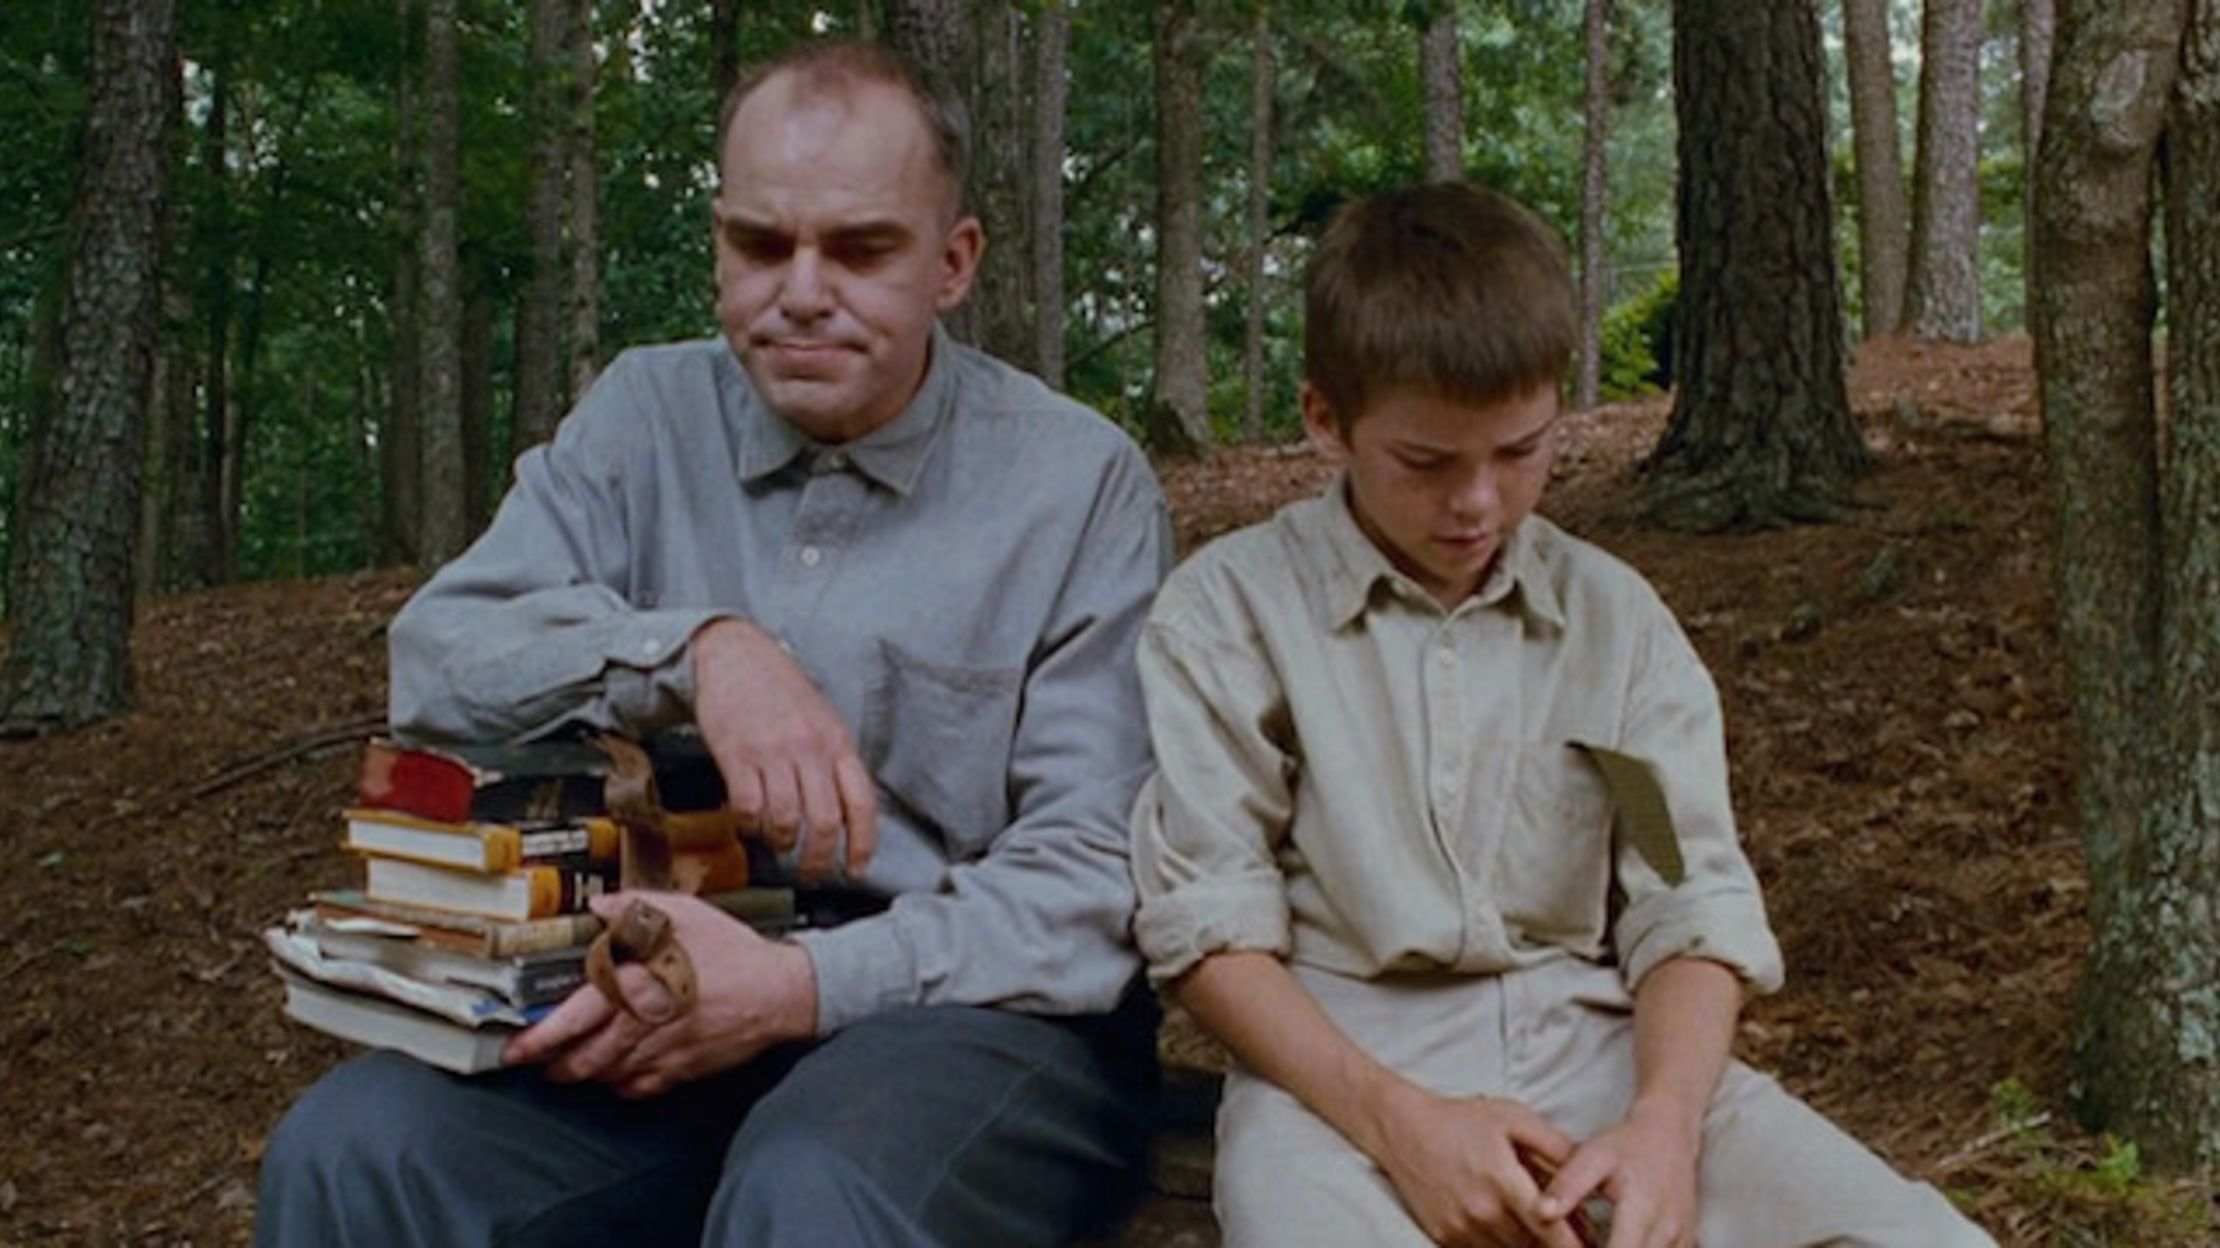 Sling Blade Chlotrudis Society for Independent Film